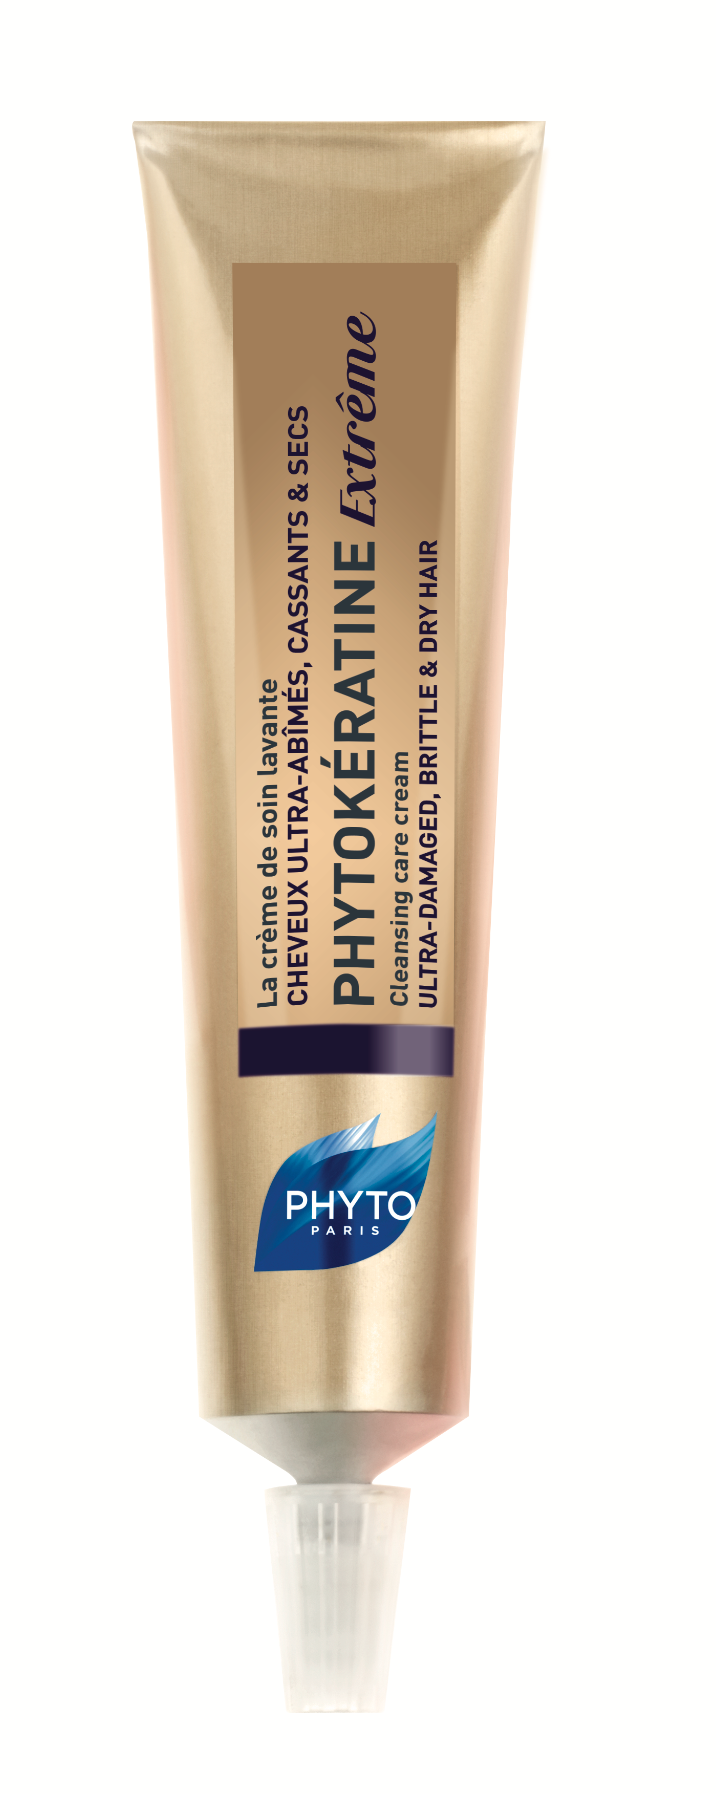 Phyto - Phytokeratine Extreme Cleansing Care Cream 75ml